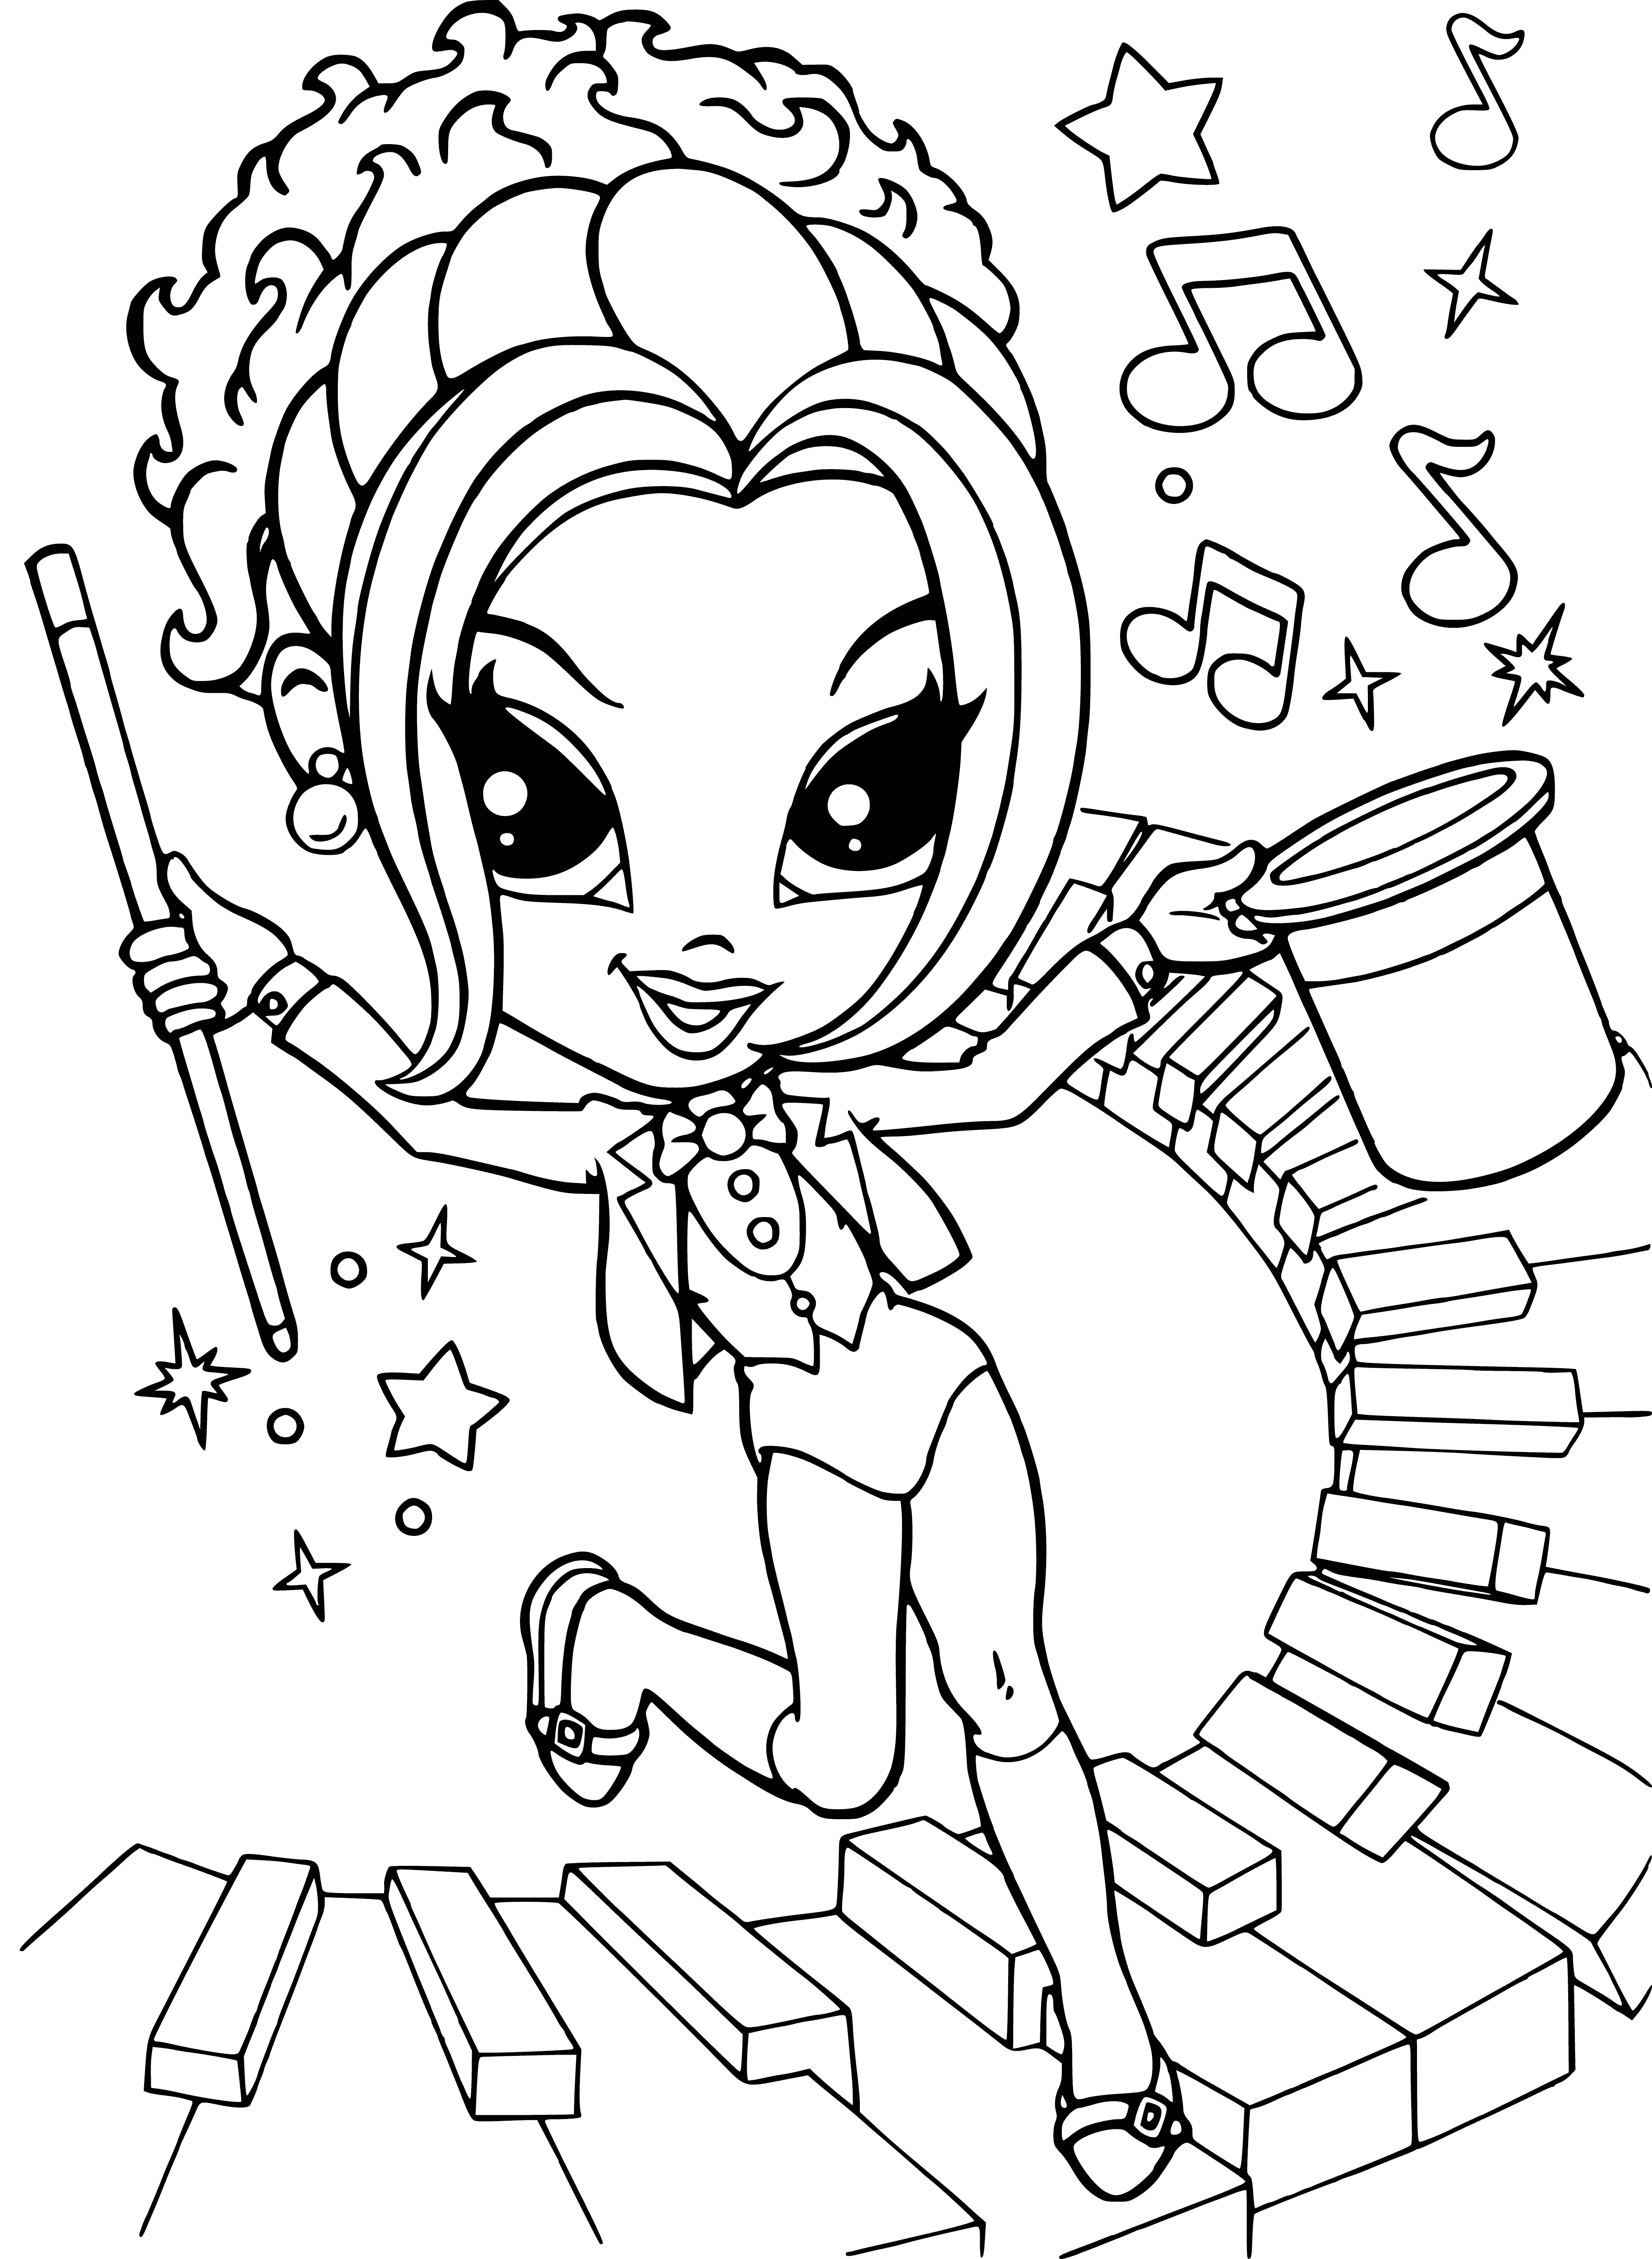 coloring page: Gorgeous, confident girl ready to take on the world with perfect hair, makeup, dress and jewelry. #GirlPower